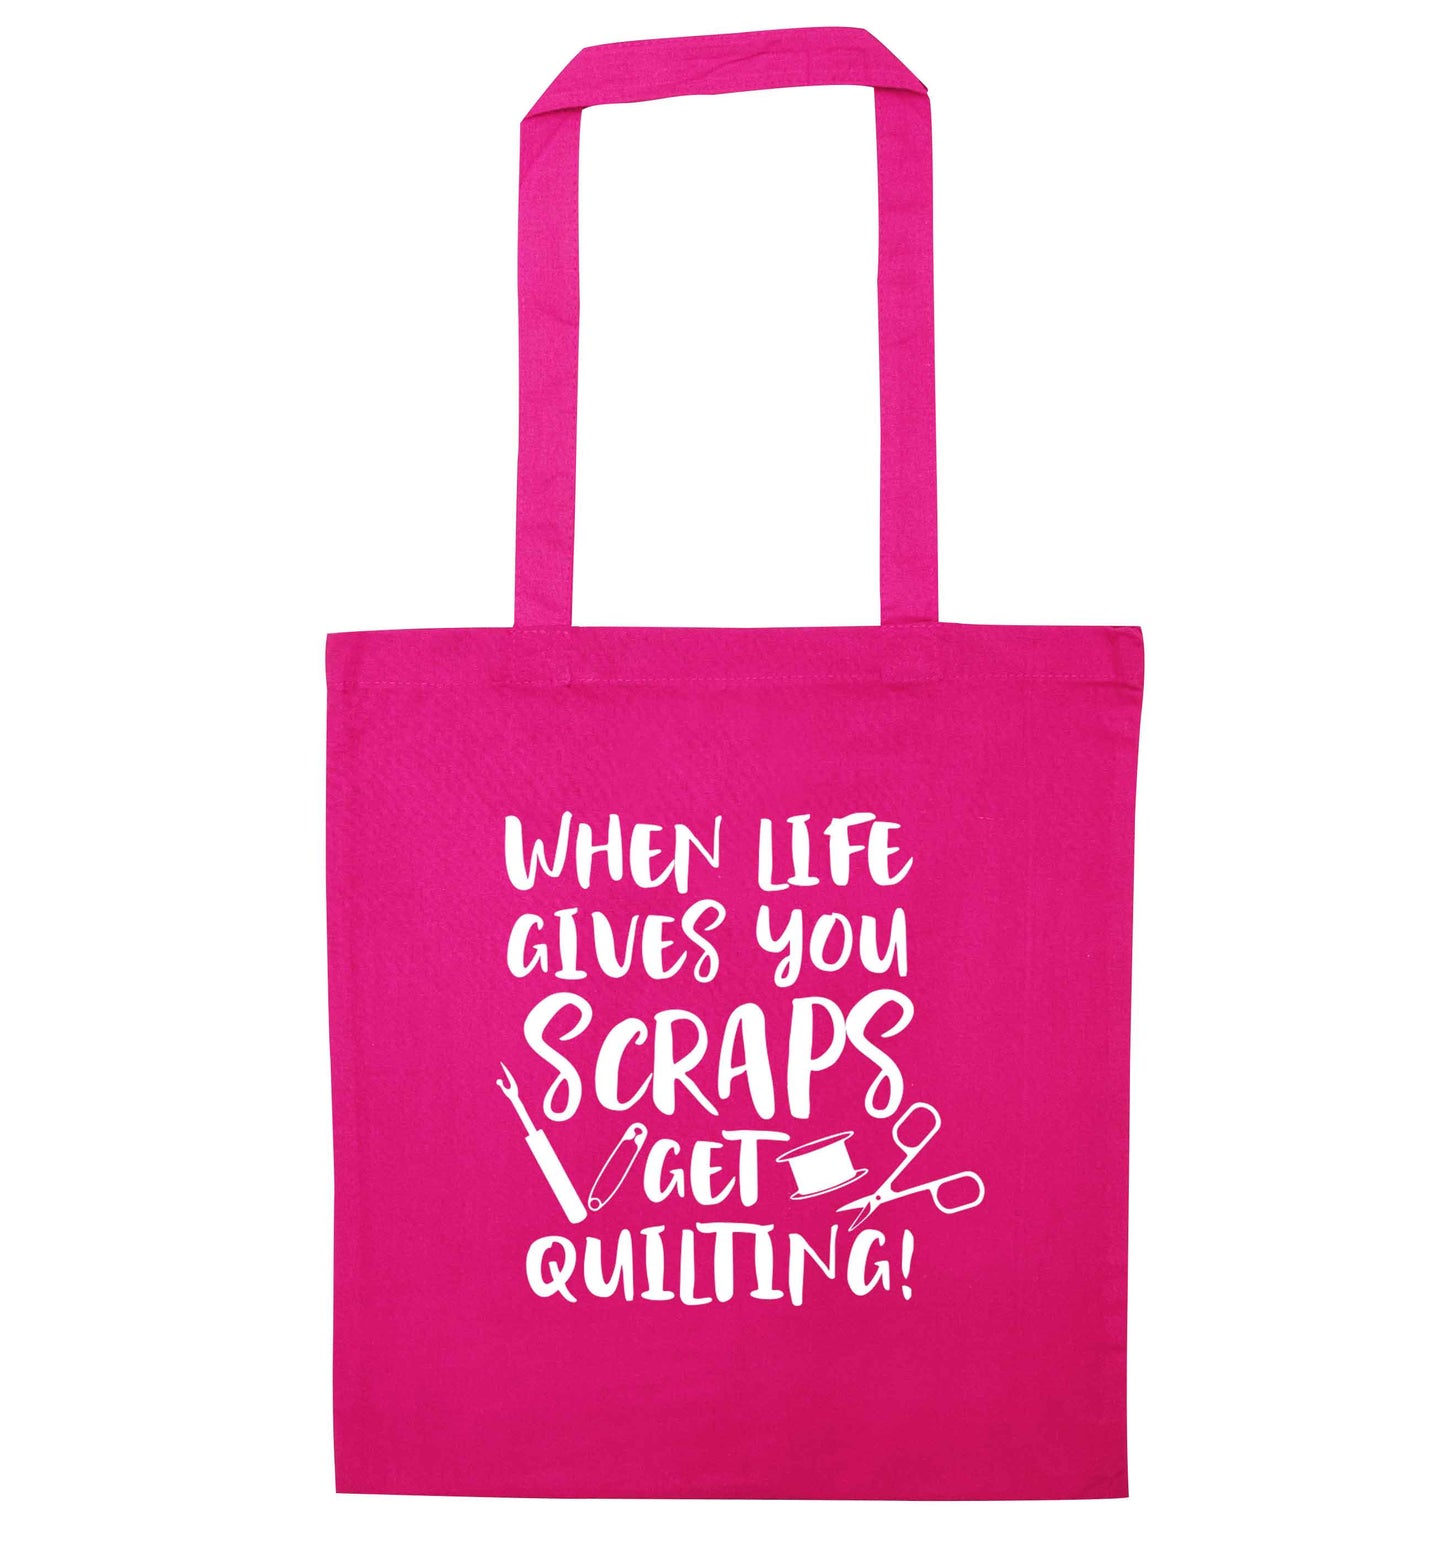 When life gives you scraps get quilting! pink tote bag